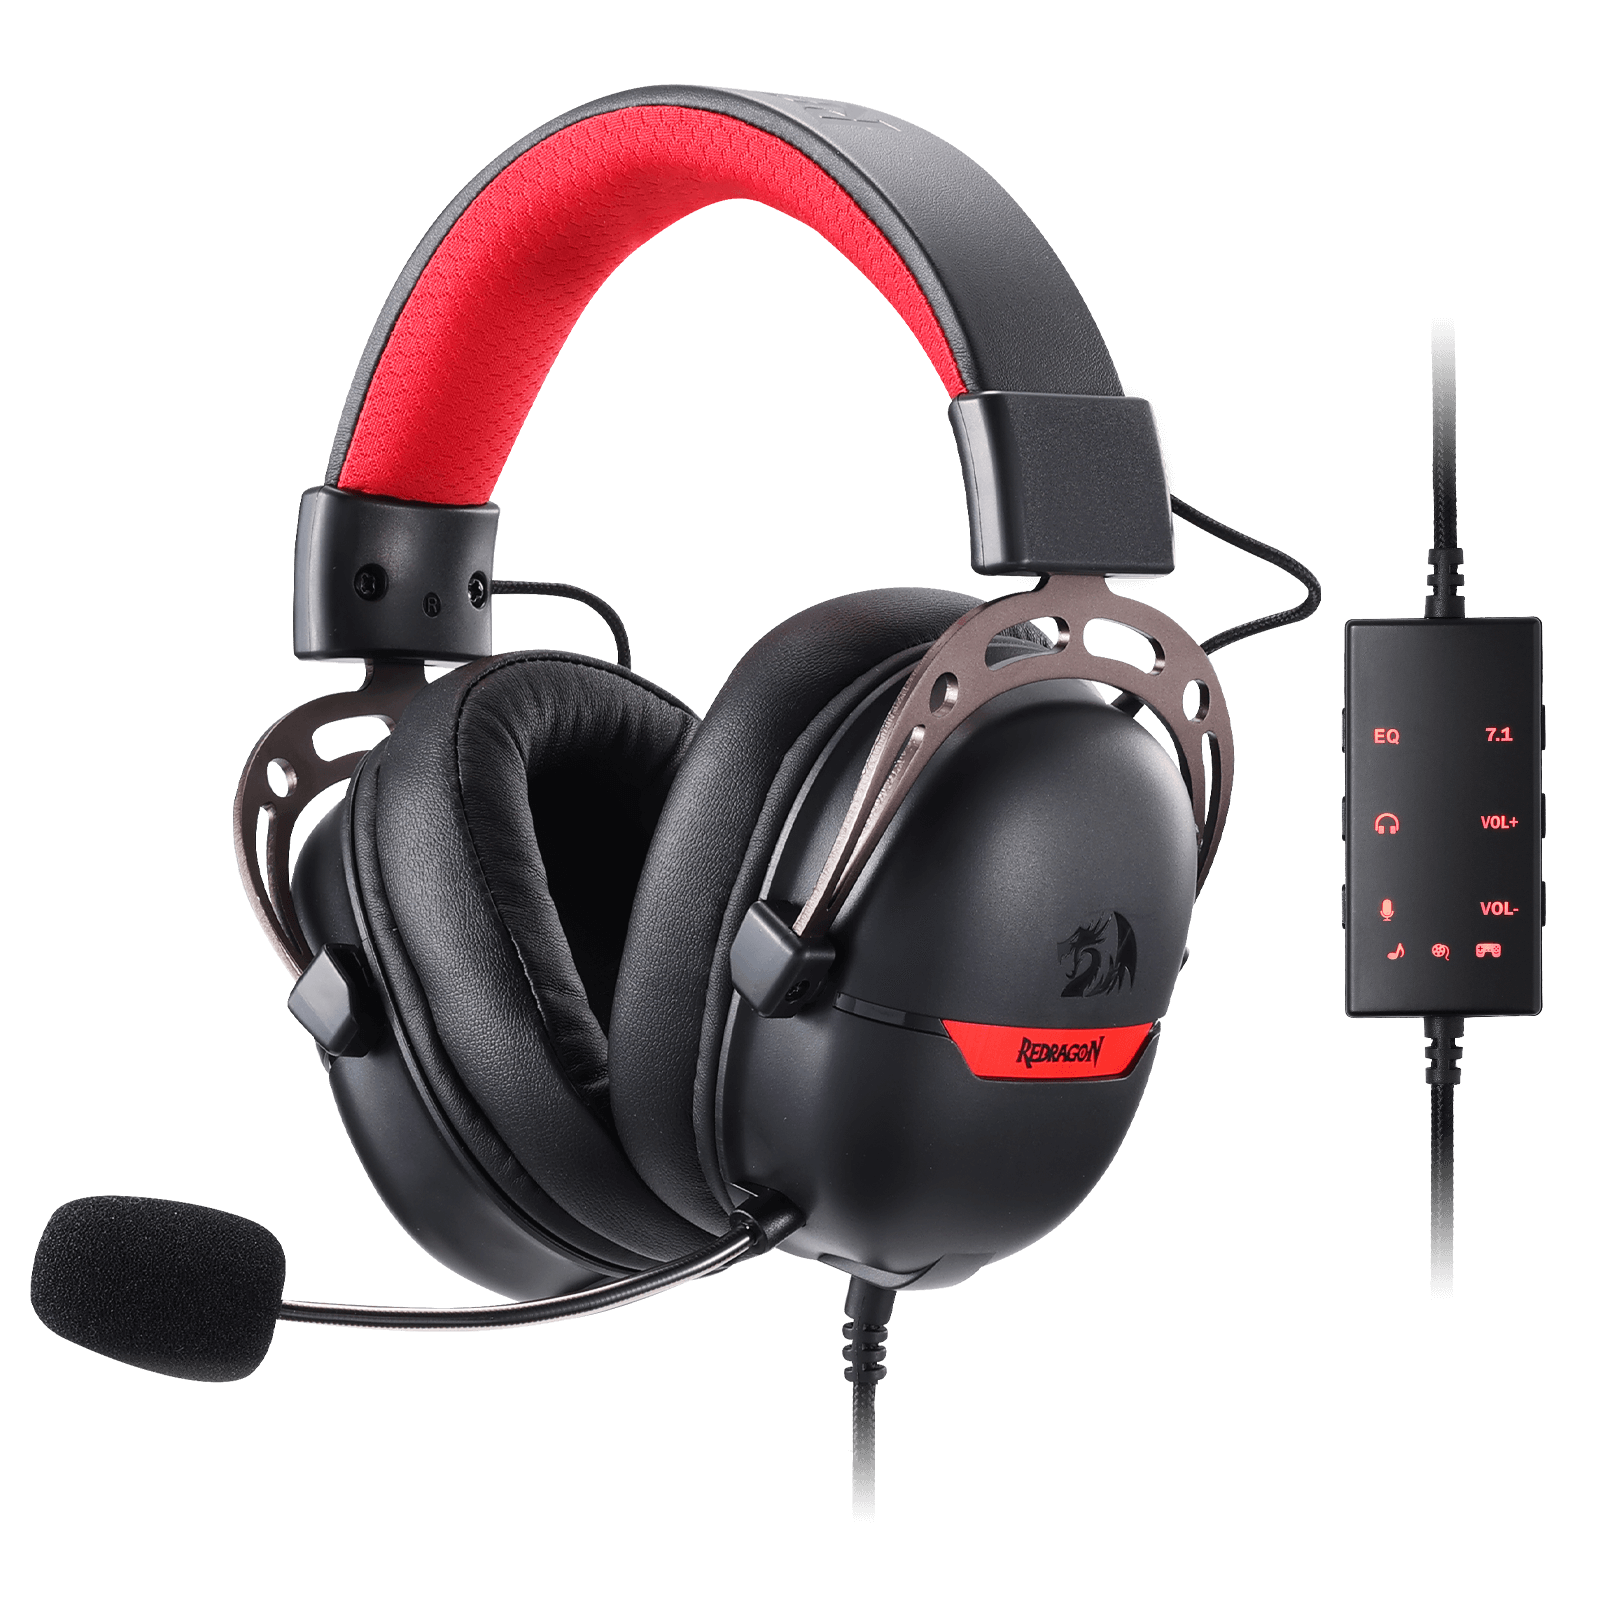 Redragon H376 Aurora Wired Gaming Headset, Virtual 7.1 Surround Sound, 40mm Drivers, in-line Control with EQ Mode, Over-Ear Headphones Works for PC/PS5/NS | show